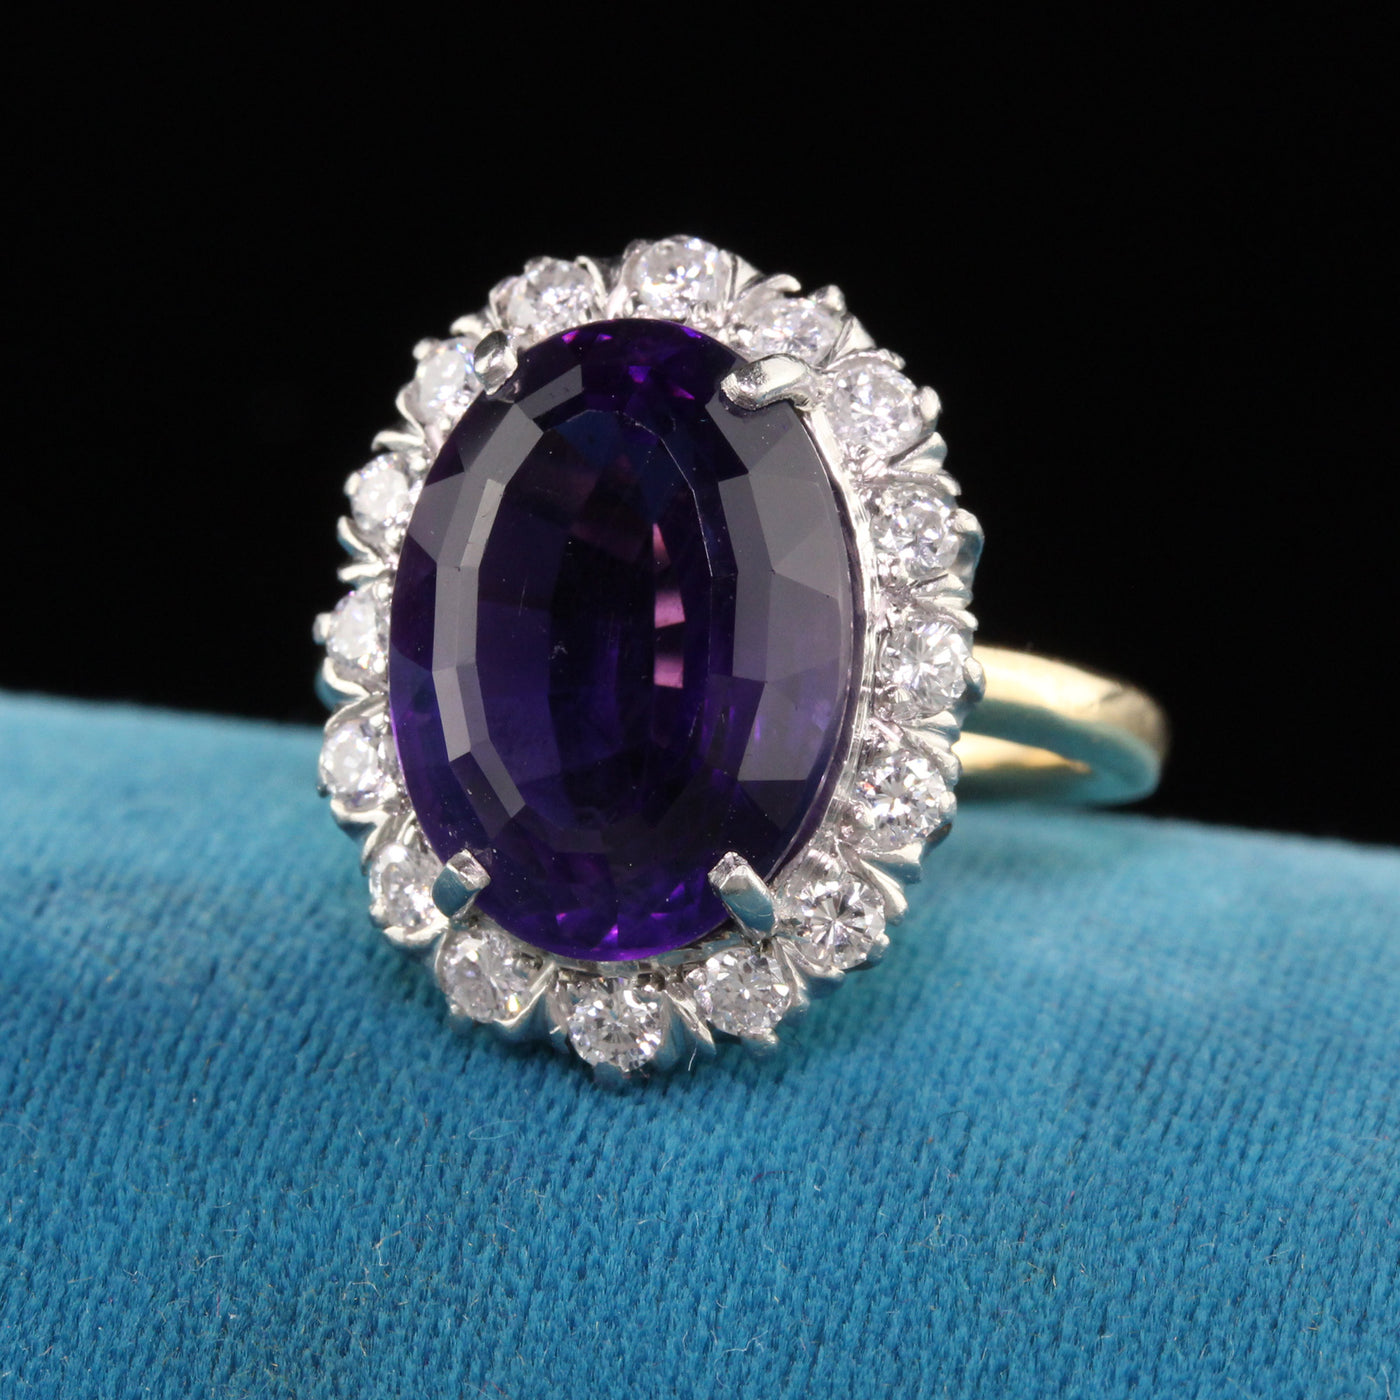 Retro Tiffany and Co 18K Gold and Platinum Diamond Amethyst Engagement Ring